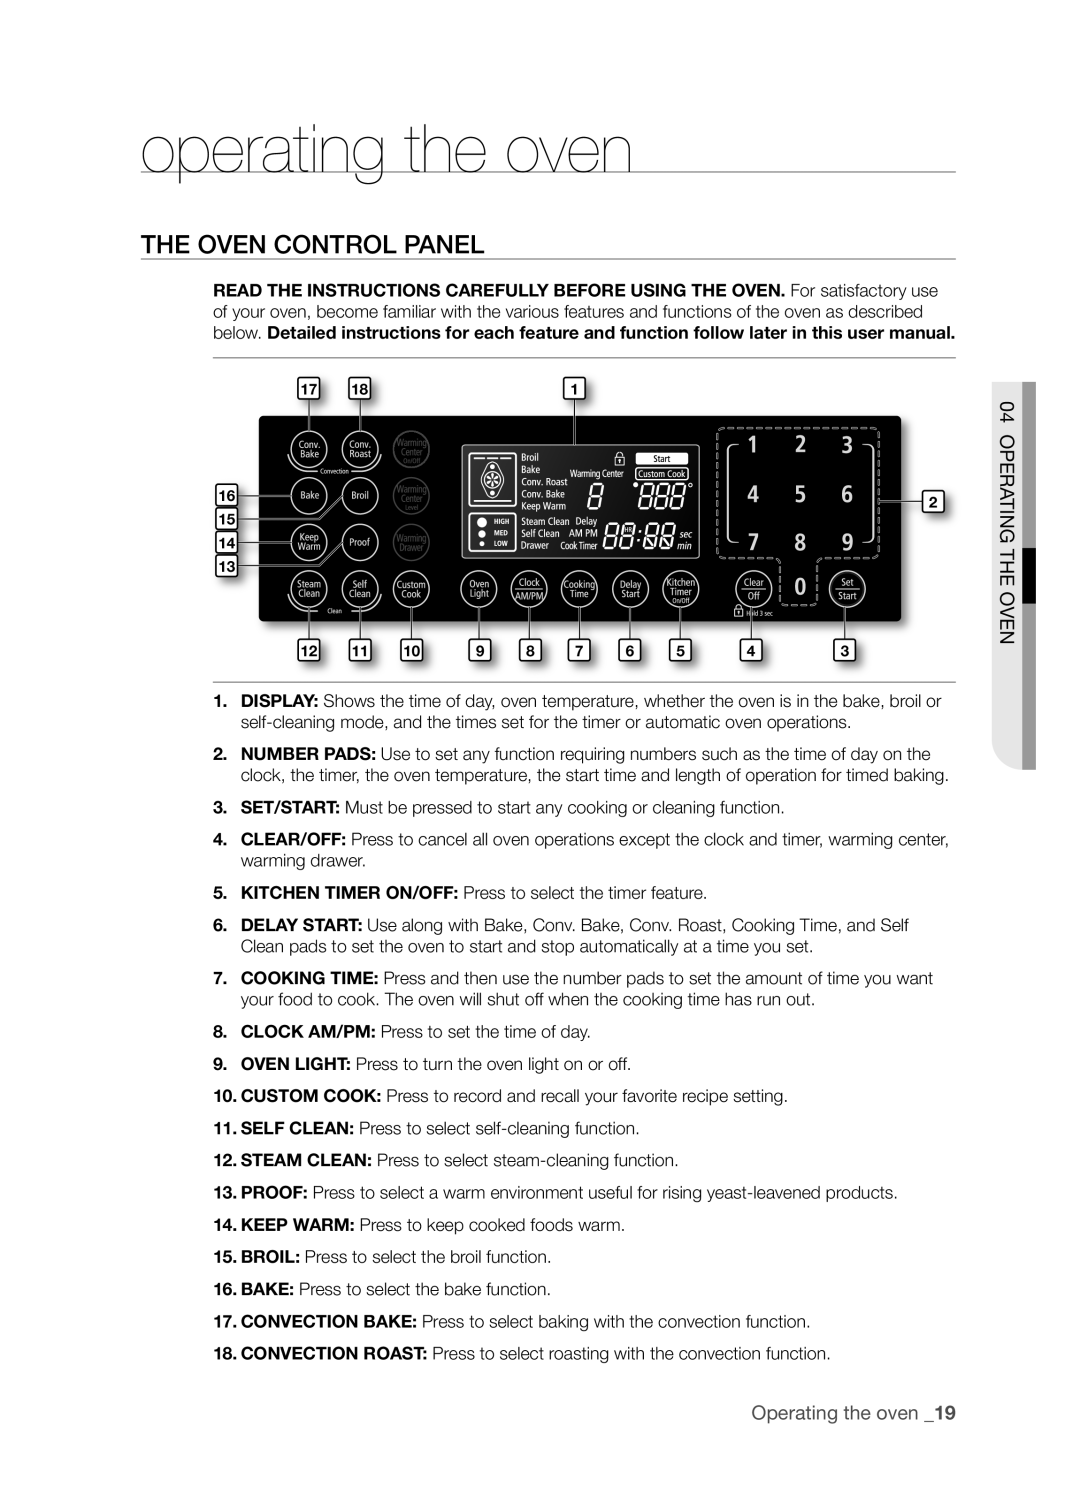 Samsung FTQ386LWUX user manual operating the oven, The Oven Control Panel, Operating The Oven, Operating the oven 